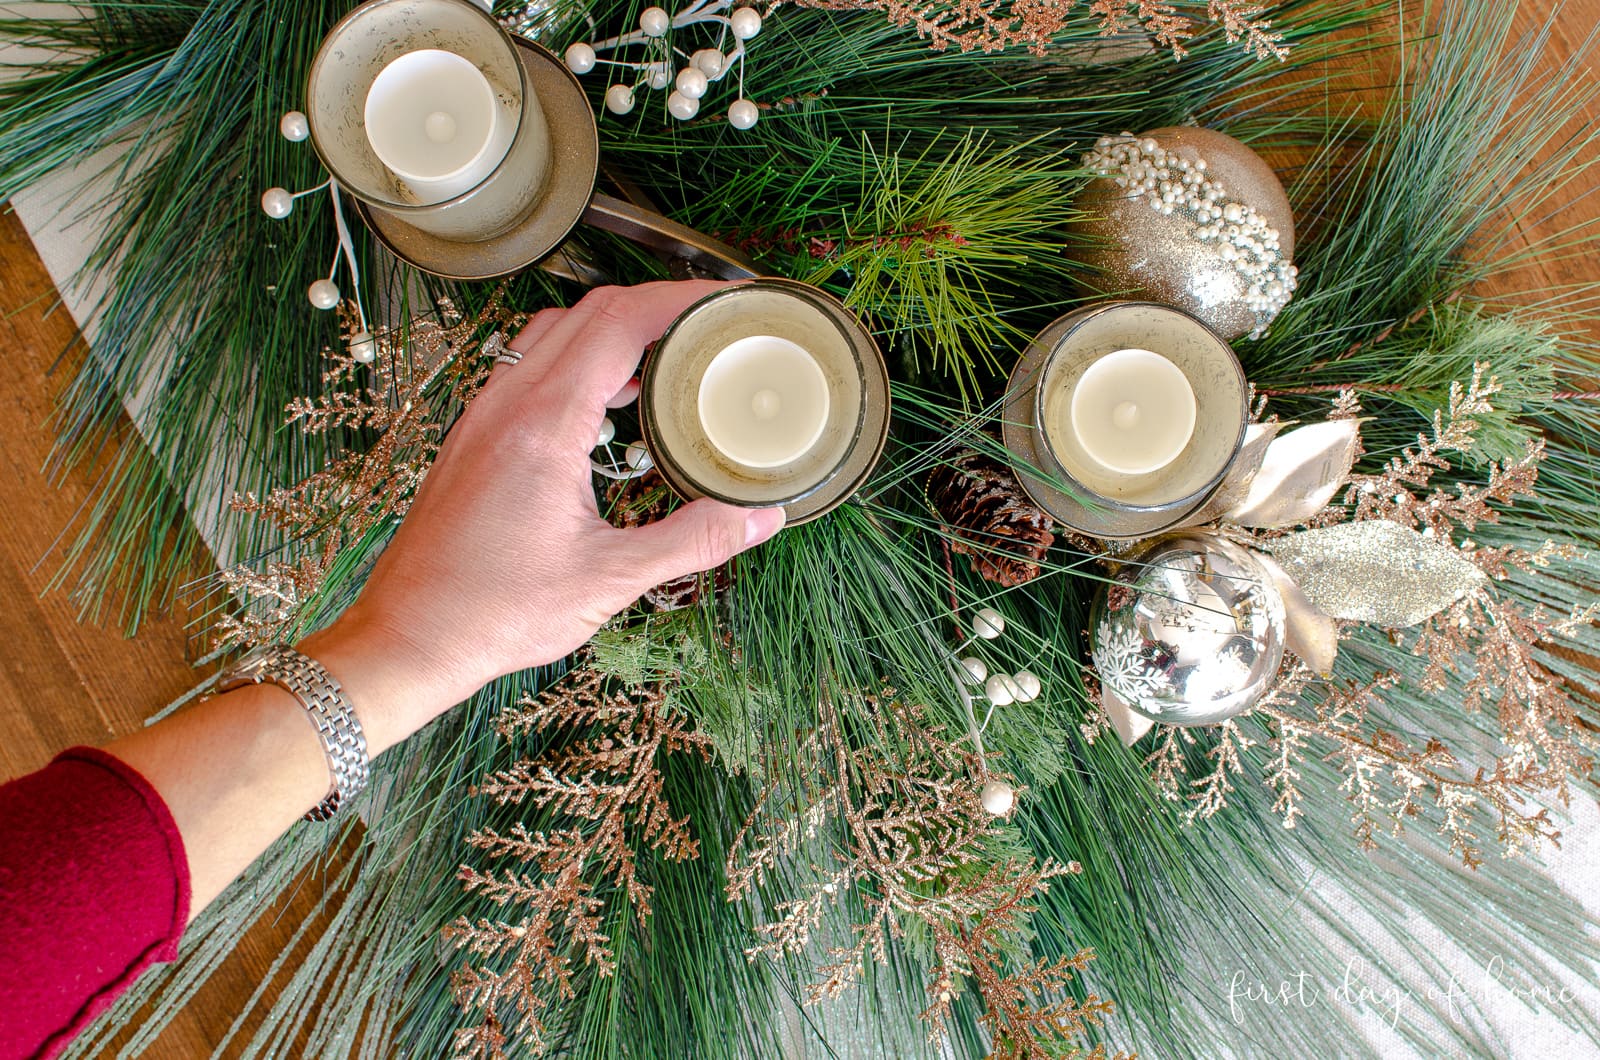 Hand placing a mercury glass votive candle on candelabra for holiday table centerpiece.